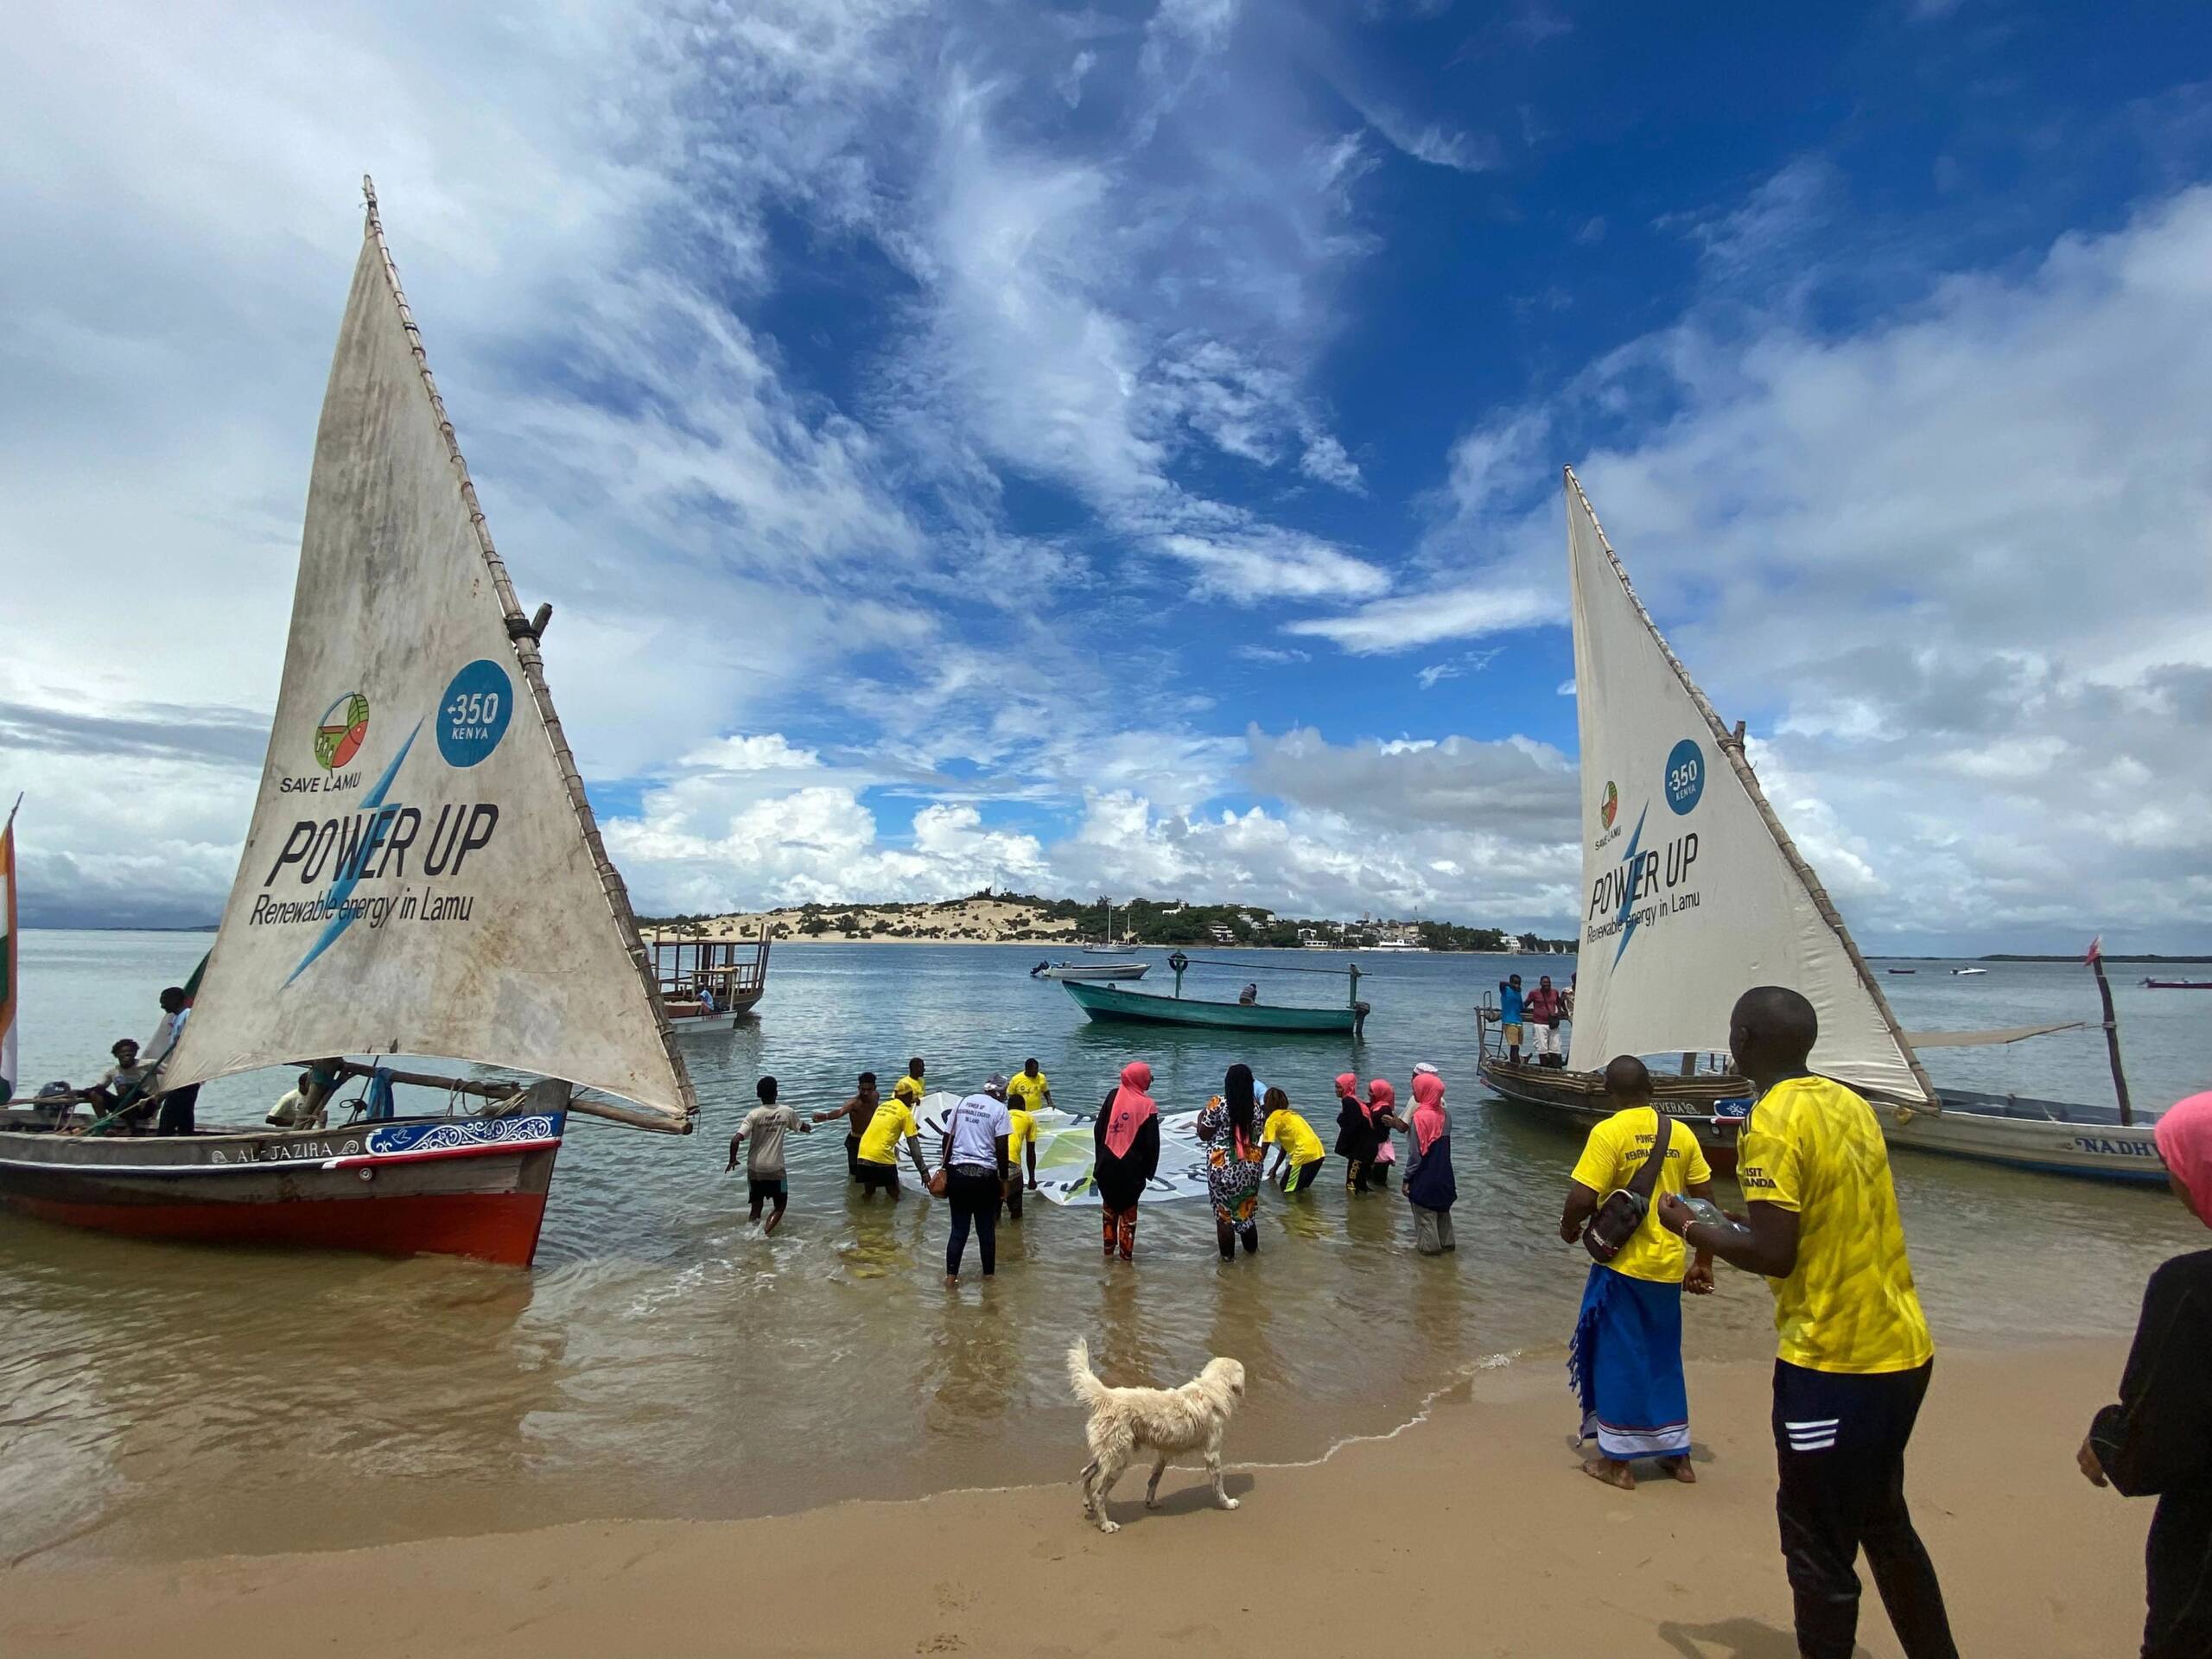 Lamu, Kenya, November 4: 350 Africa and Save Lamu organize a creative culture display and Sail Dhow Races as they call on Kenya’s government to take true climate leadership and power Lamu with renewable energy. Photo credit: 350Africa